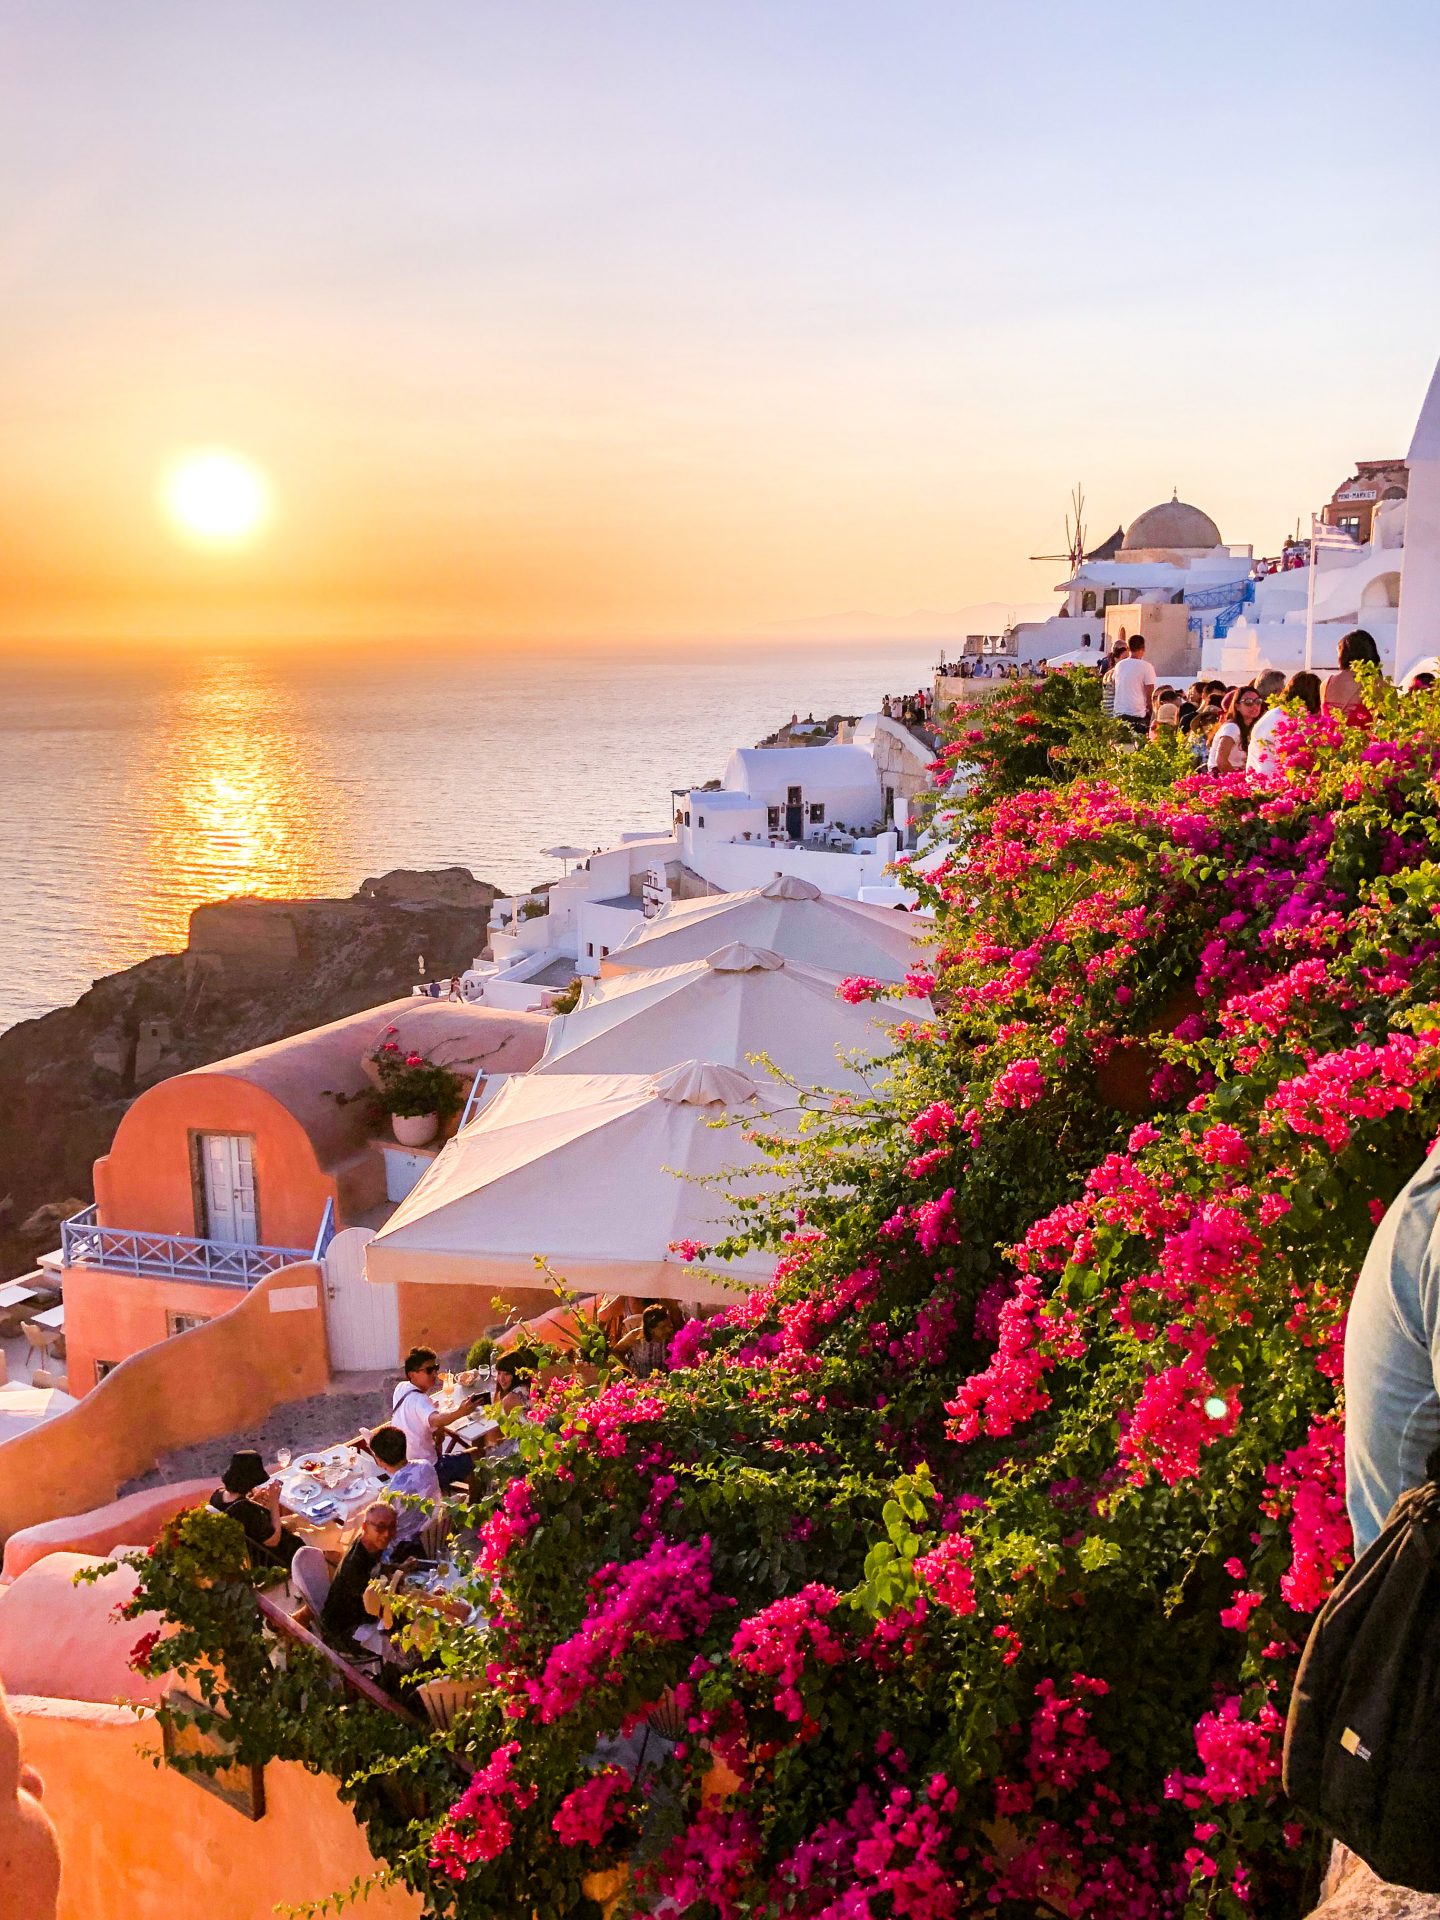 Is Santorini worth the hype? Travel Guide – Prices, Food & Top Things To Do